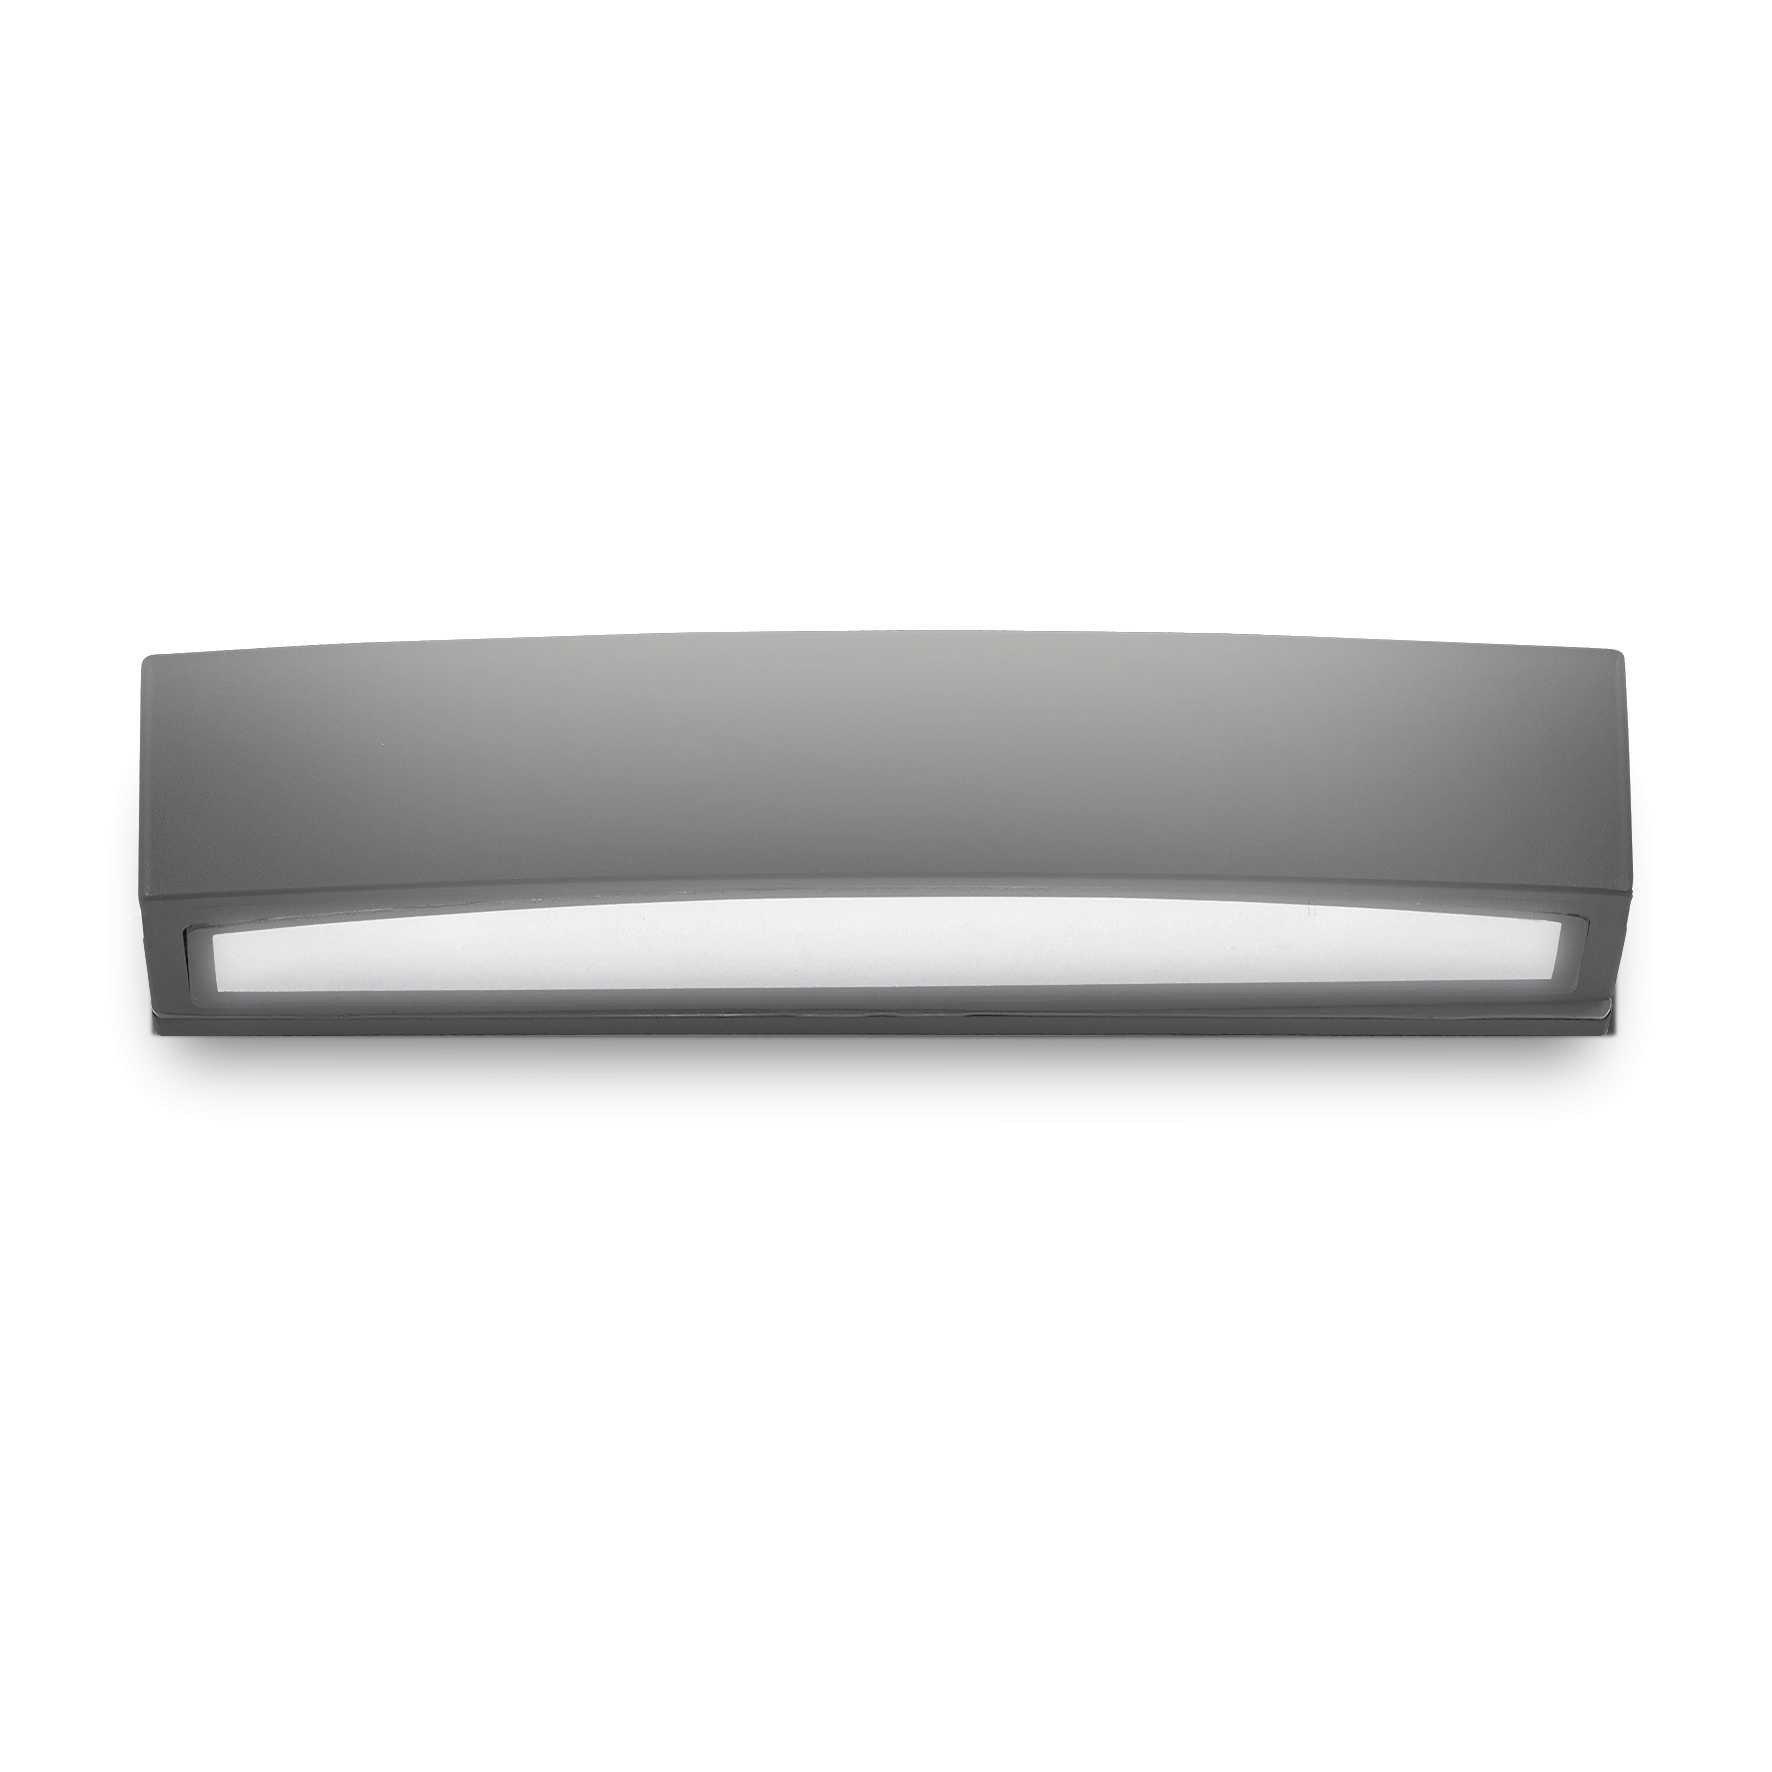 Andromeda 2 Light Outdoor Large Up Down Wall Light Anthracite Putty IP54 E27